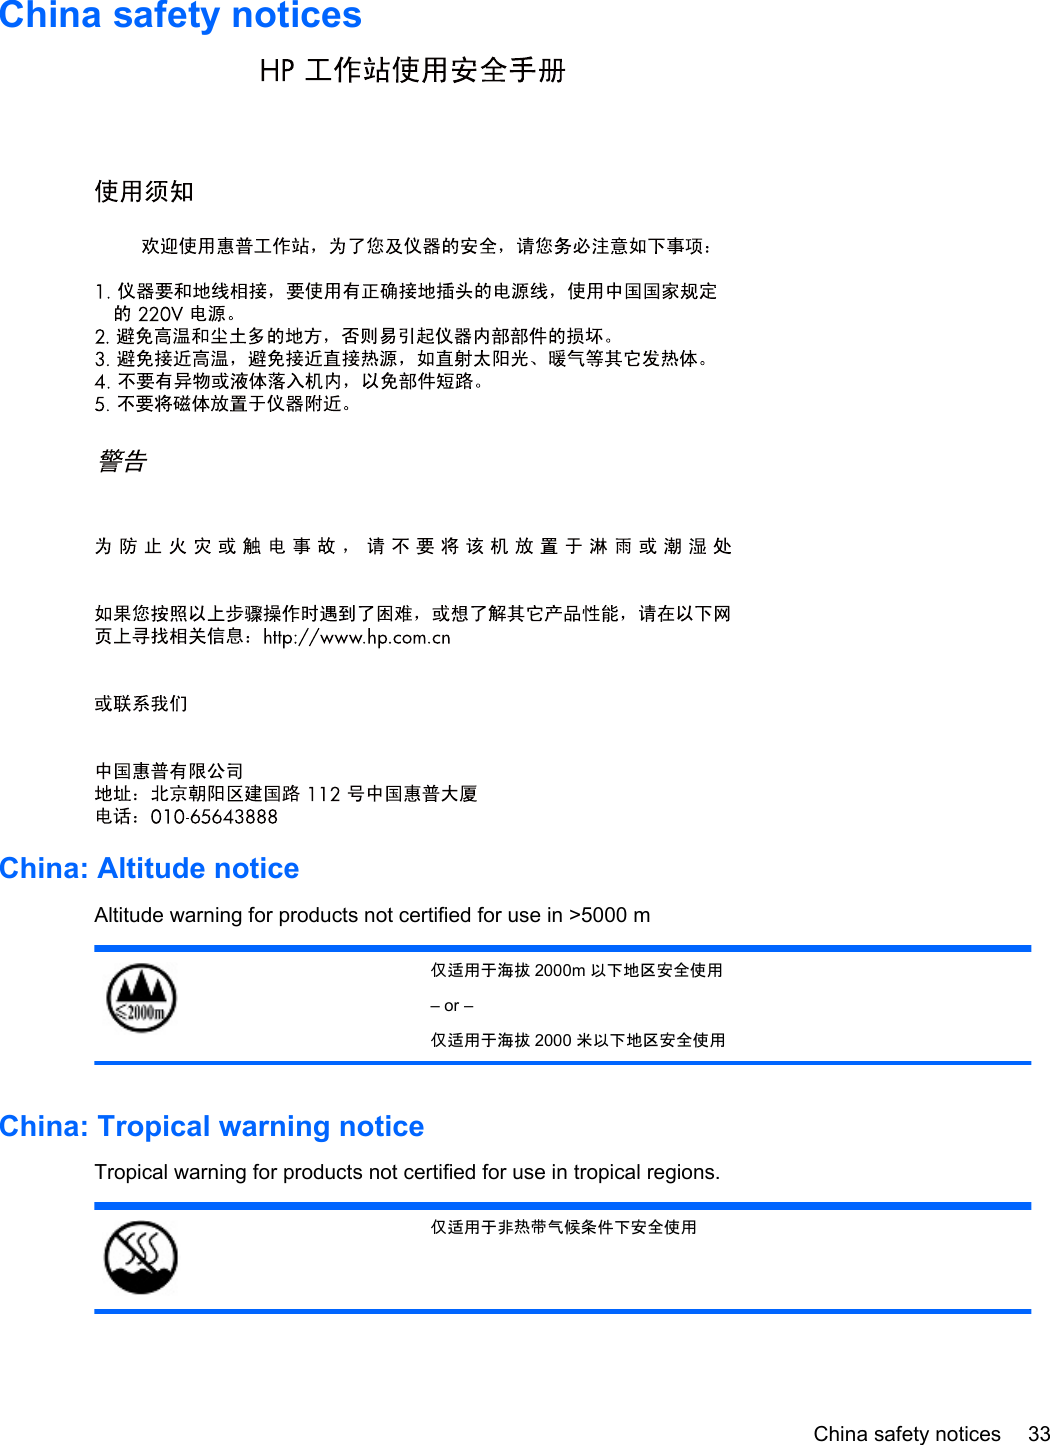 China safety noticesChina: Altitude noticeAltitude warning for products not certified for use in &gt;5000 m仅适用于海拔 2000m 以下地区安全使用– or –仅适用于海拔 2000 米以下地区安全使用China: Tropical warning noticeTropical warning for products not certified for use in tropical regions.仅适用于非热带气候条件下安全使用China safety notices 33